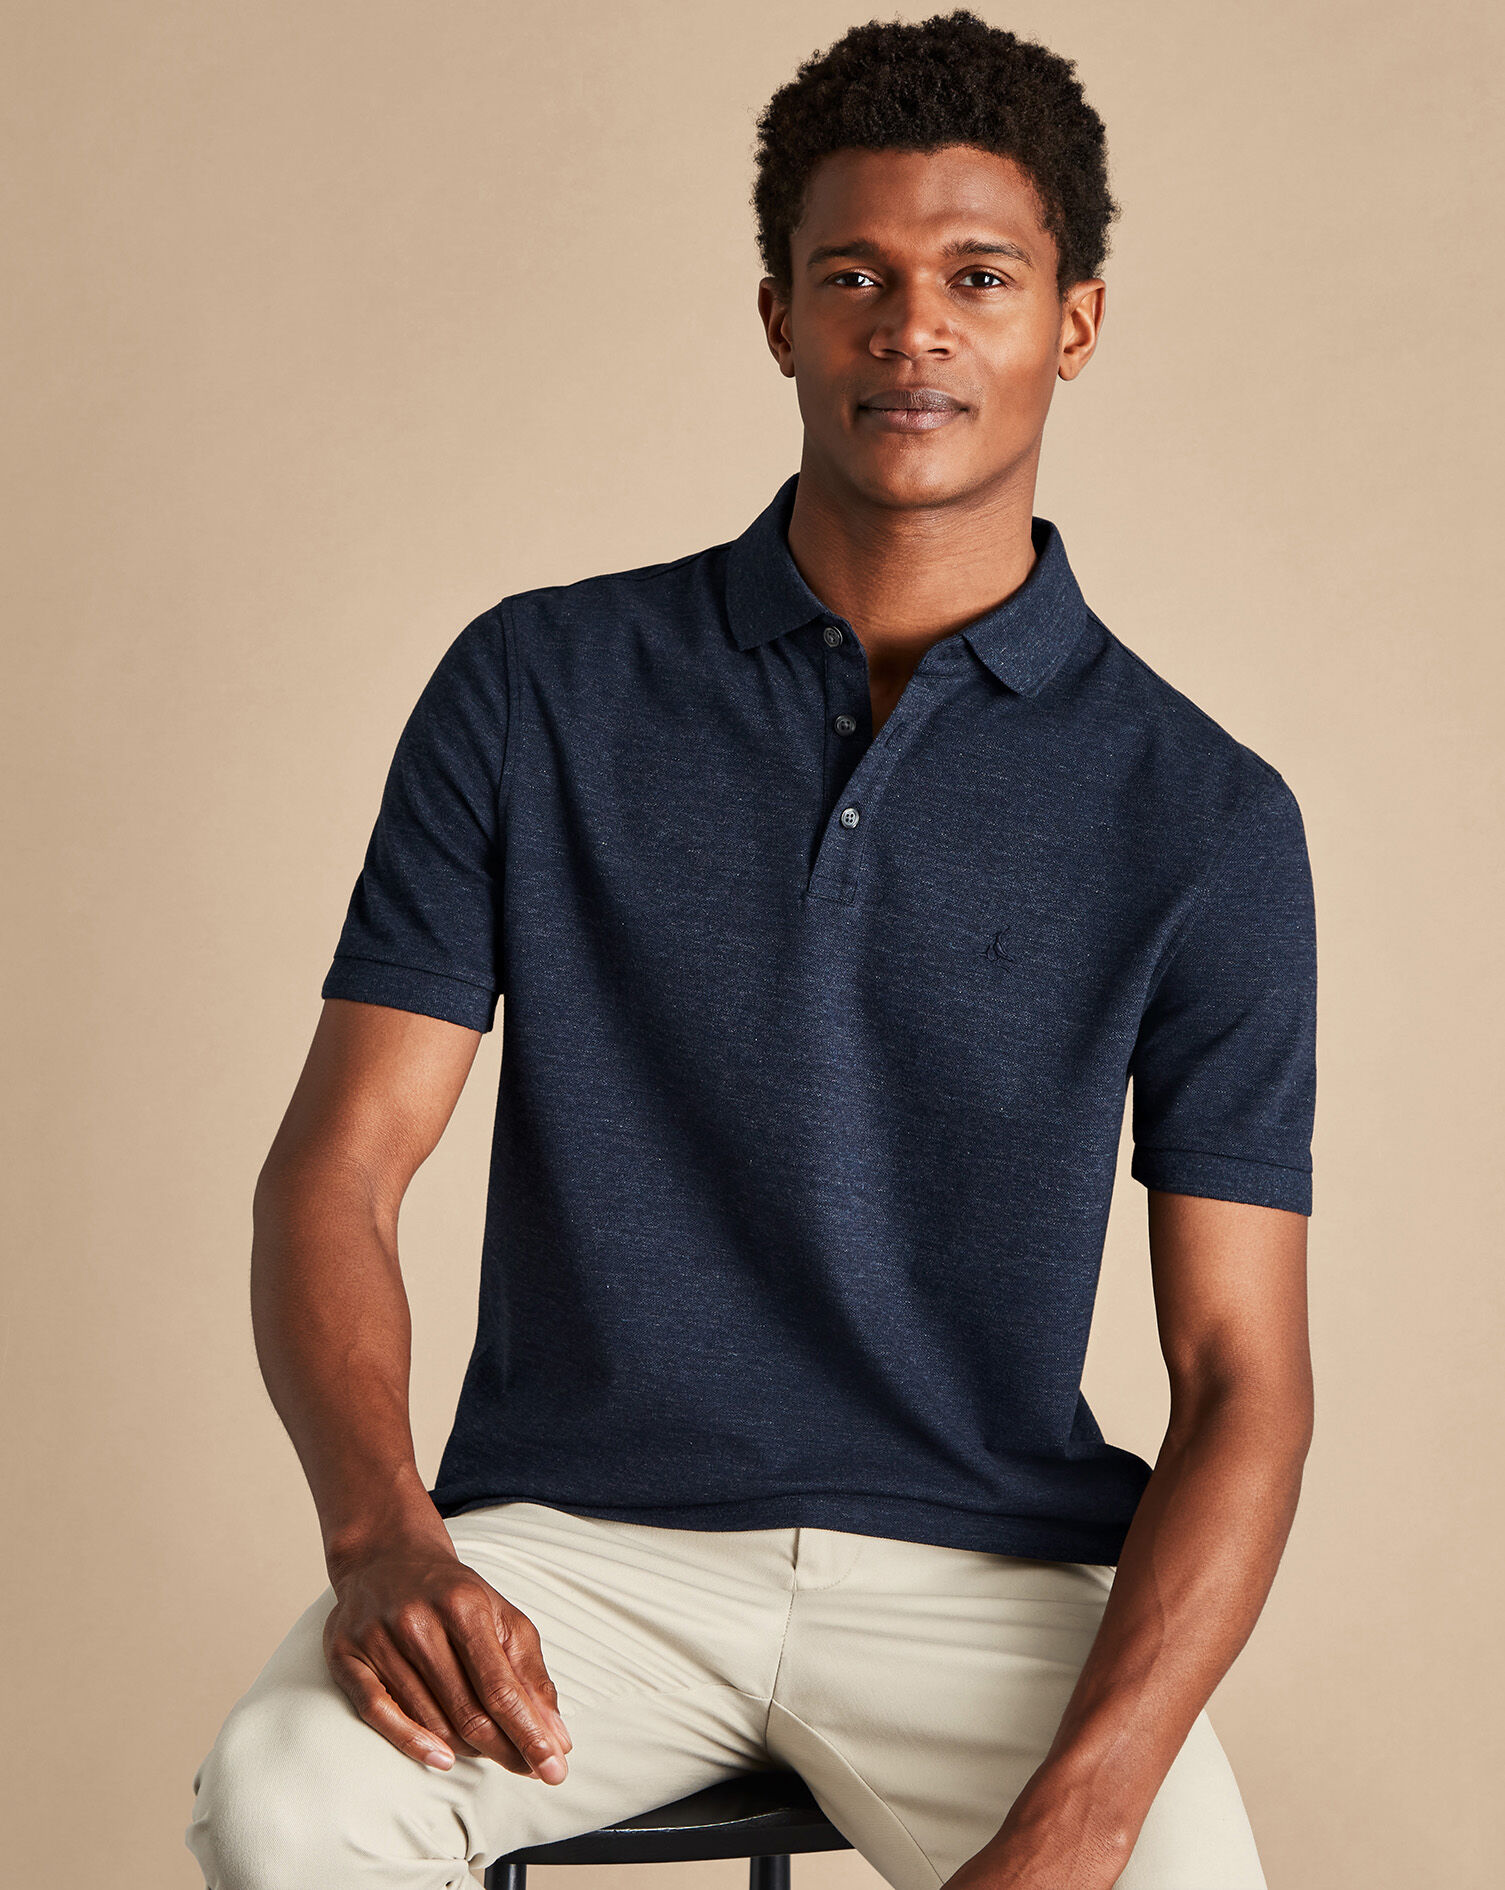 It's Polo (Shirt) Season…Here's How To Wear Them This Summer | Polo shirt  outfits, Navy blue polo shirts, Polo outfit